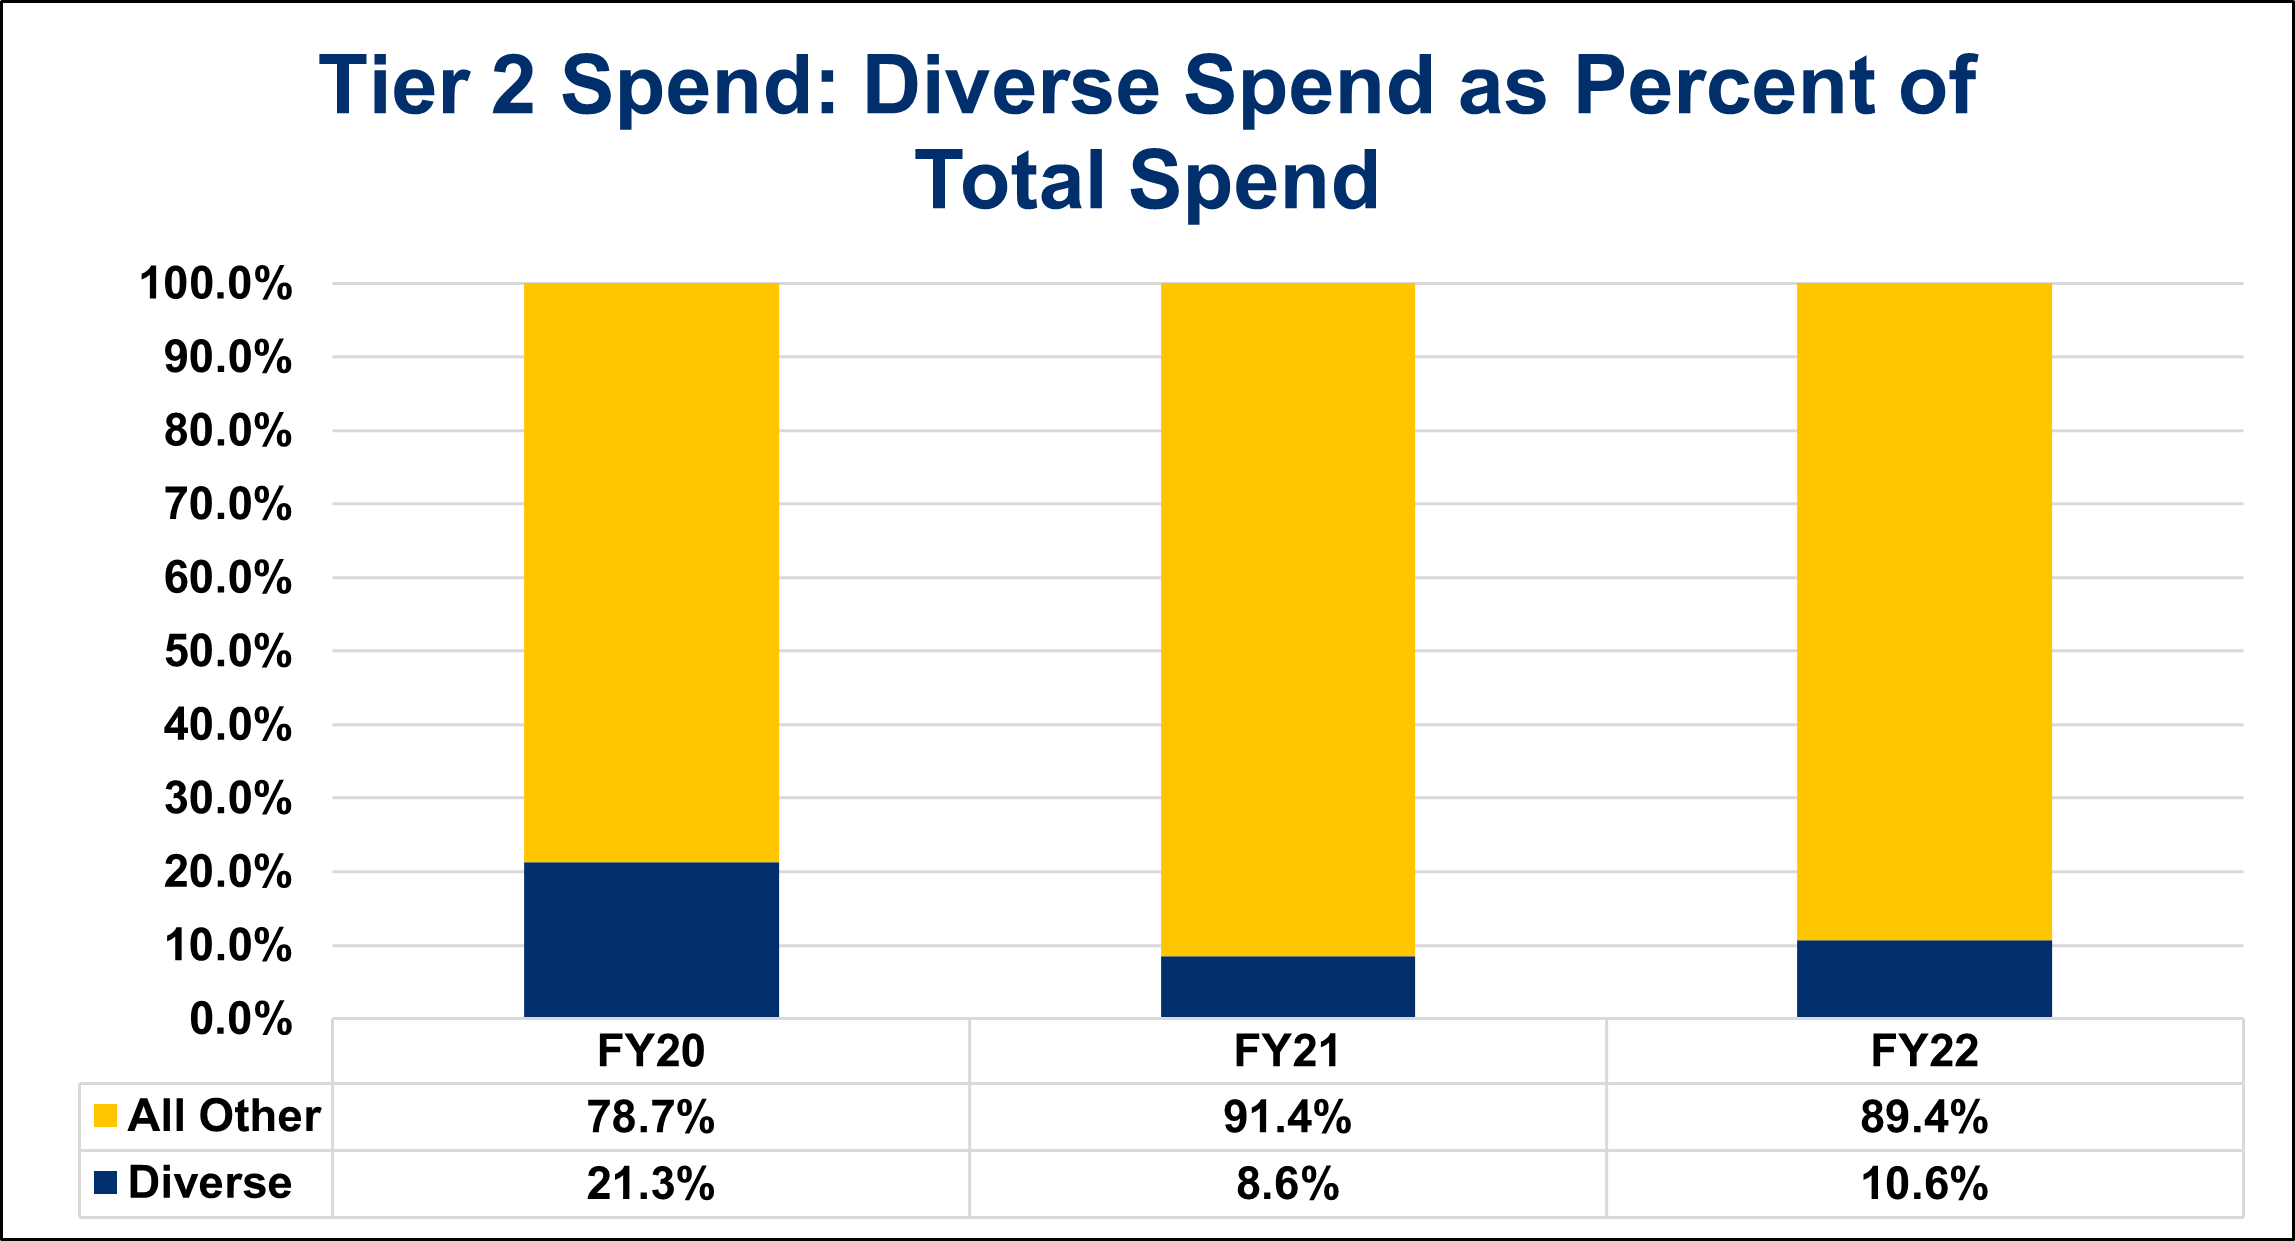 Tier 2 Spend: Diverse Spend as Percent of Total Spend